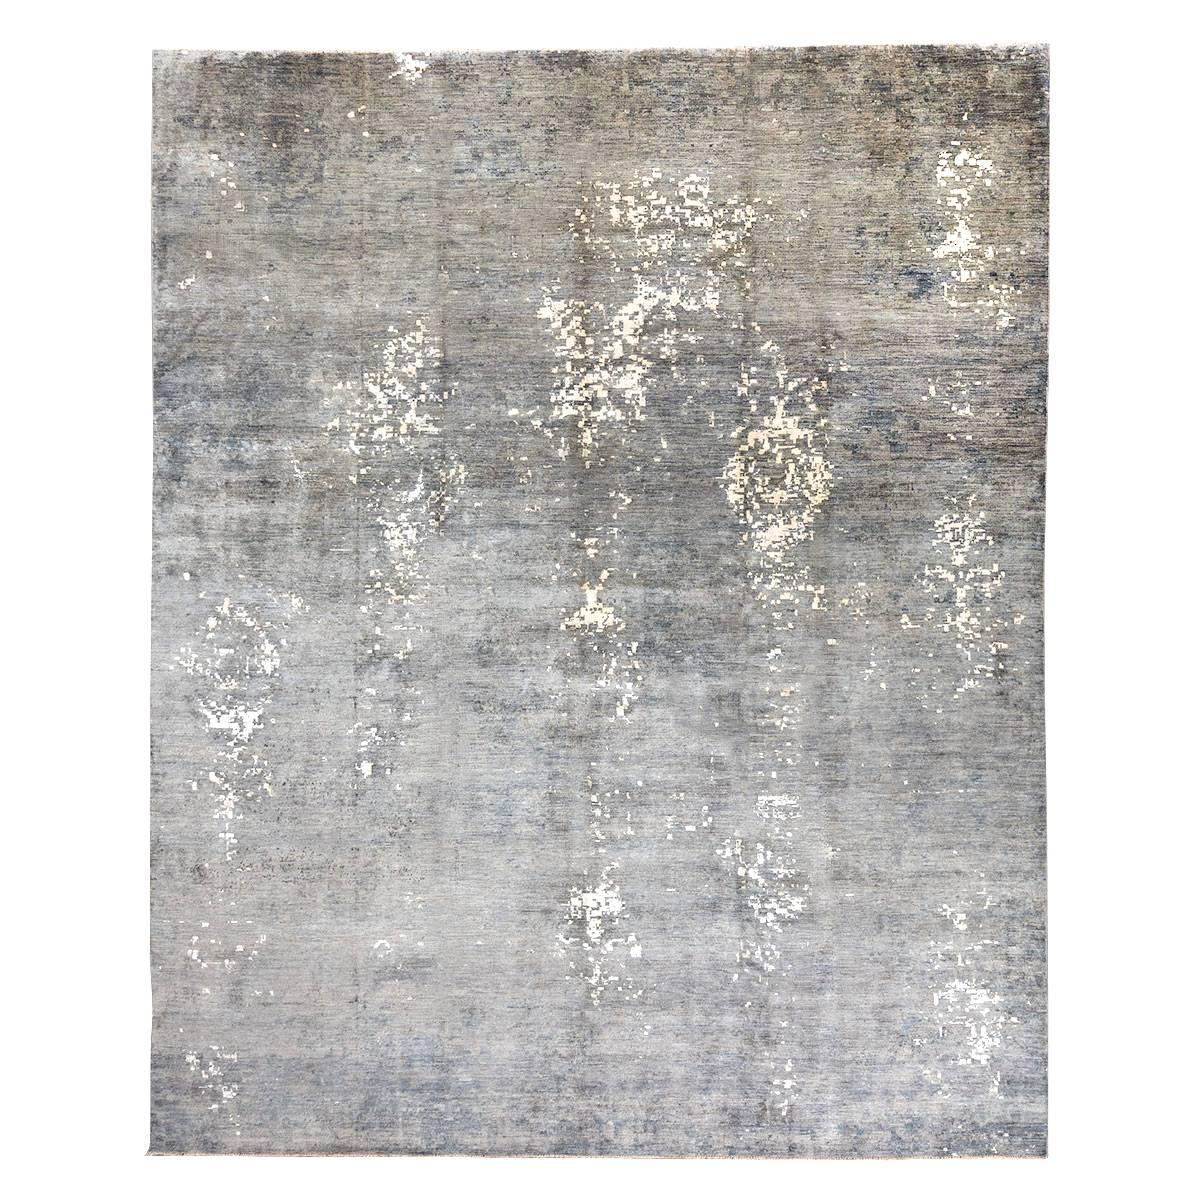 21st Century Silk and Wool Rug, Grey Colors over Abstract Design.